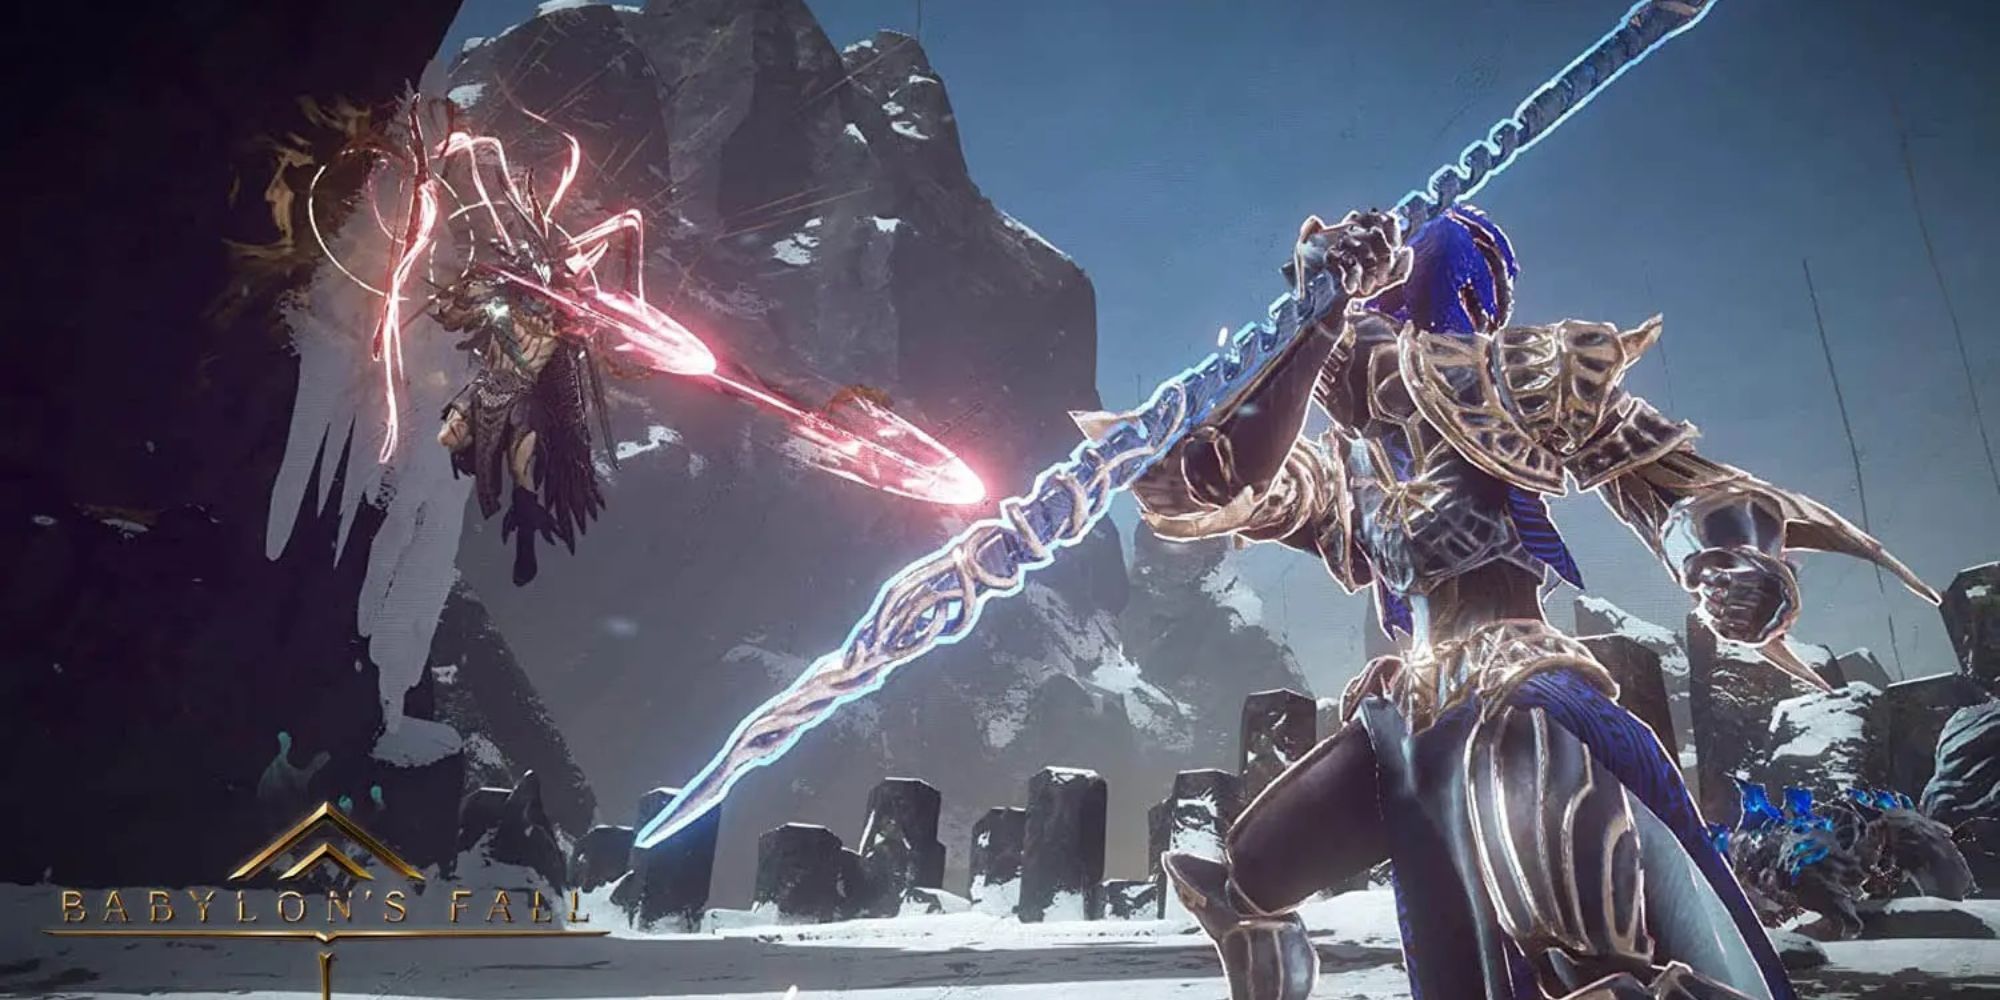 Babylon's Fall Combat Blue And Gold Spear-Wielder In Right Foreground Jumping Archer In Left Background